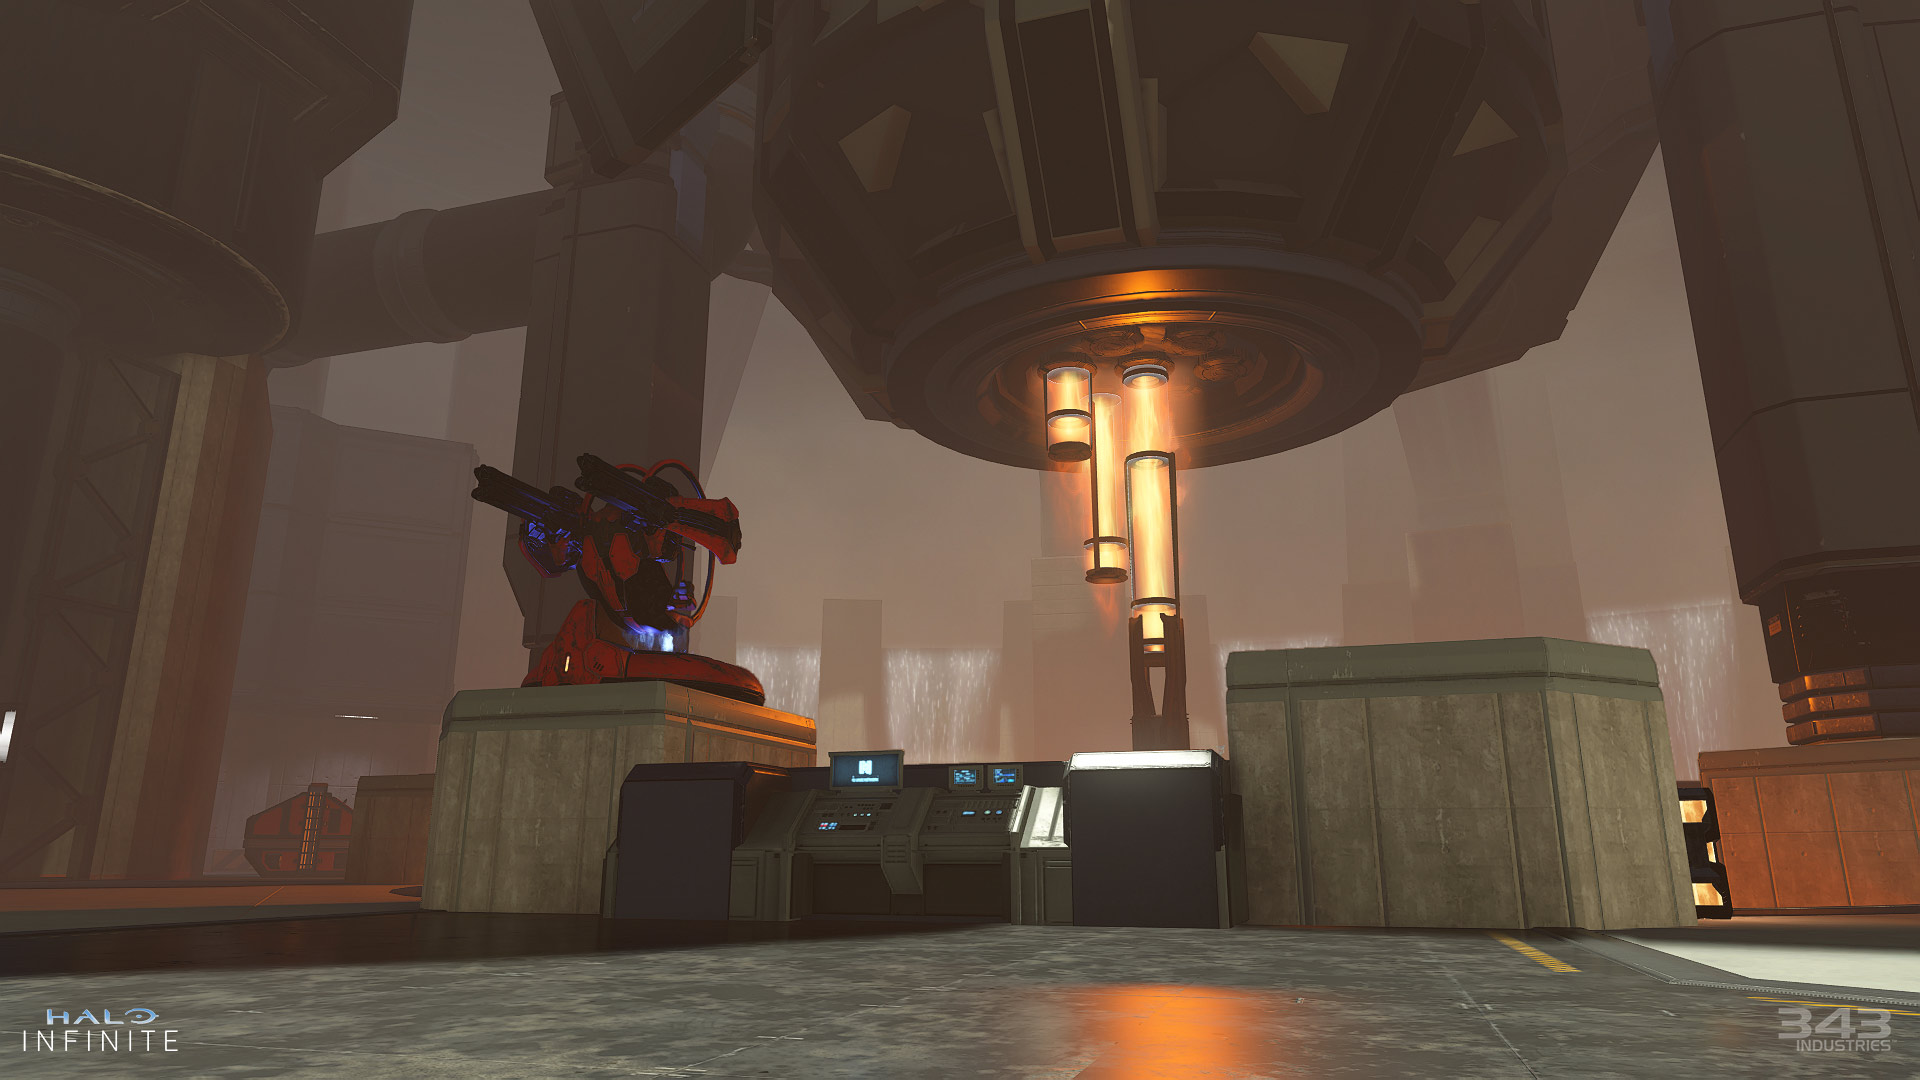 A remake of Halo 4's Perdition map in Halo Infinite Forge